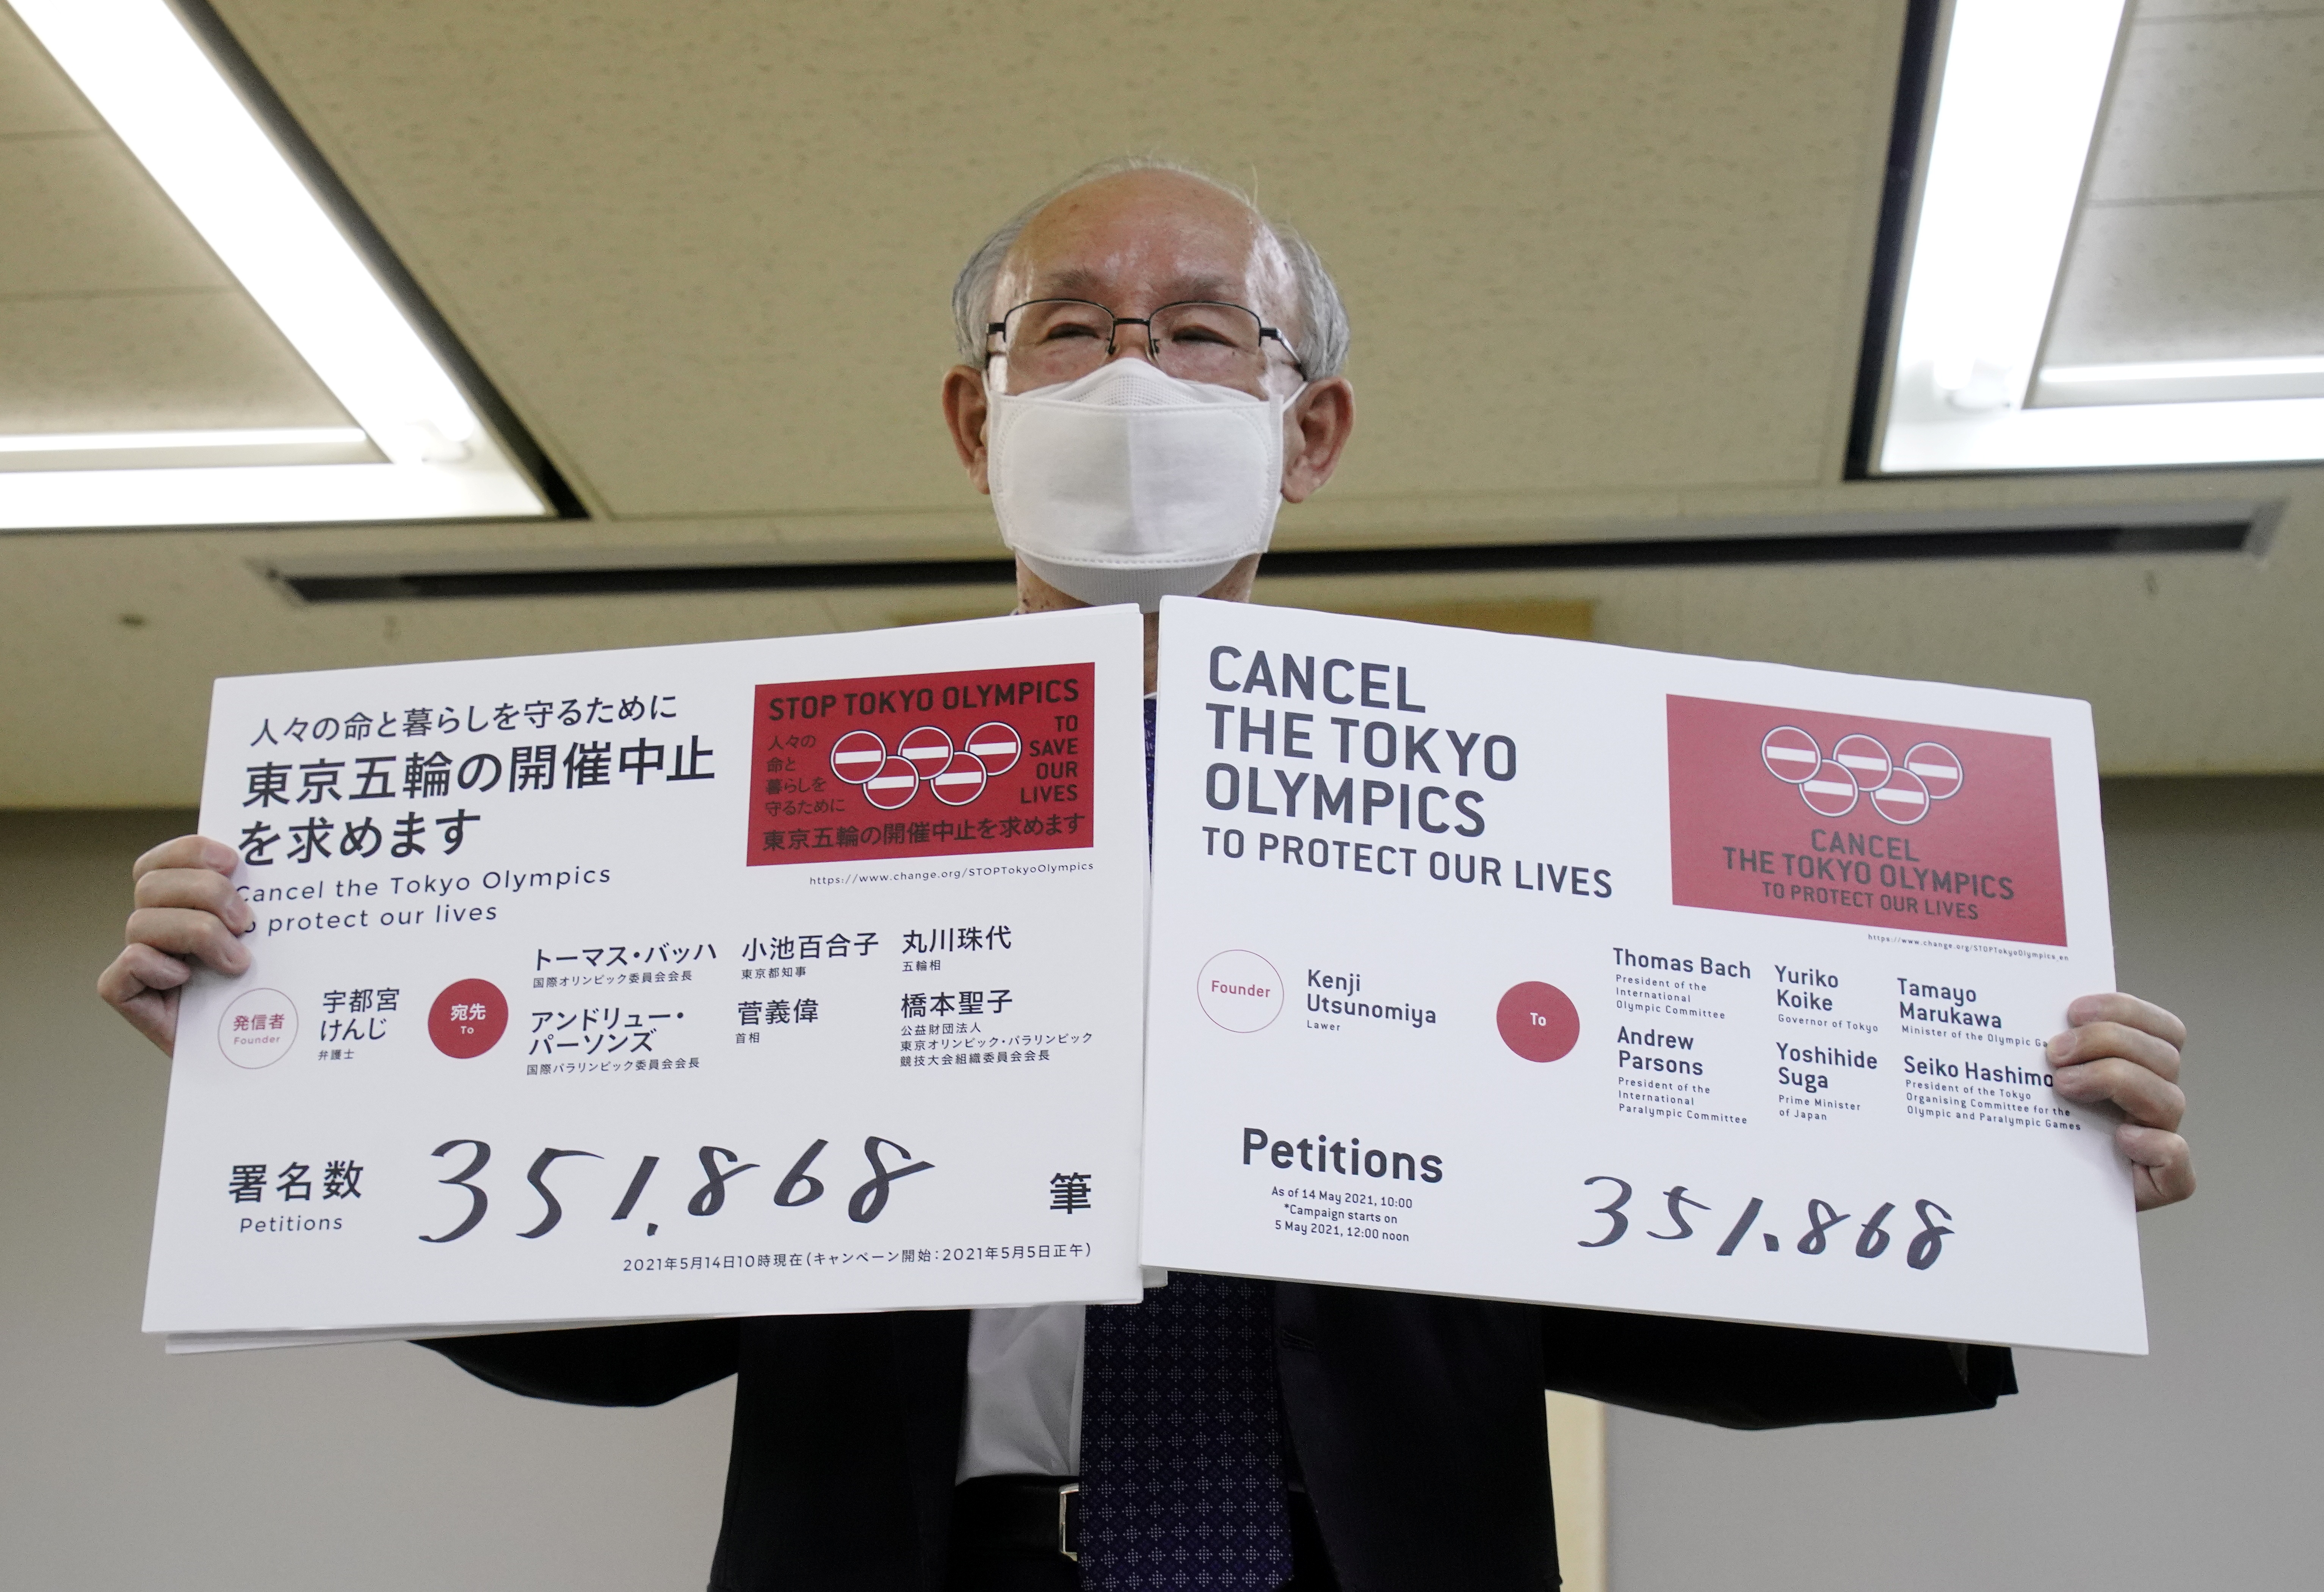 Lawyer Kenji Utsunomiya shows off placards during a news conference after he and anti-Olympics petition organizer to submit a petition calling for the Tokyo 2020 Olympics to be cancelled in Tokyo